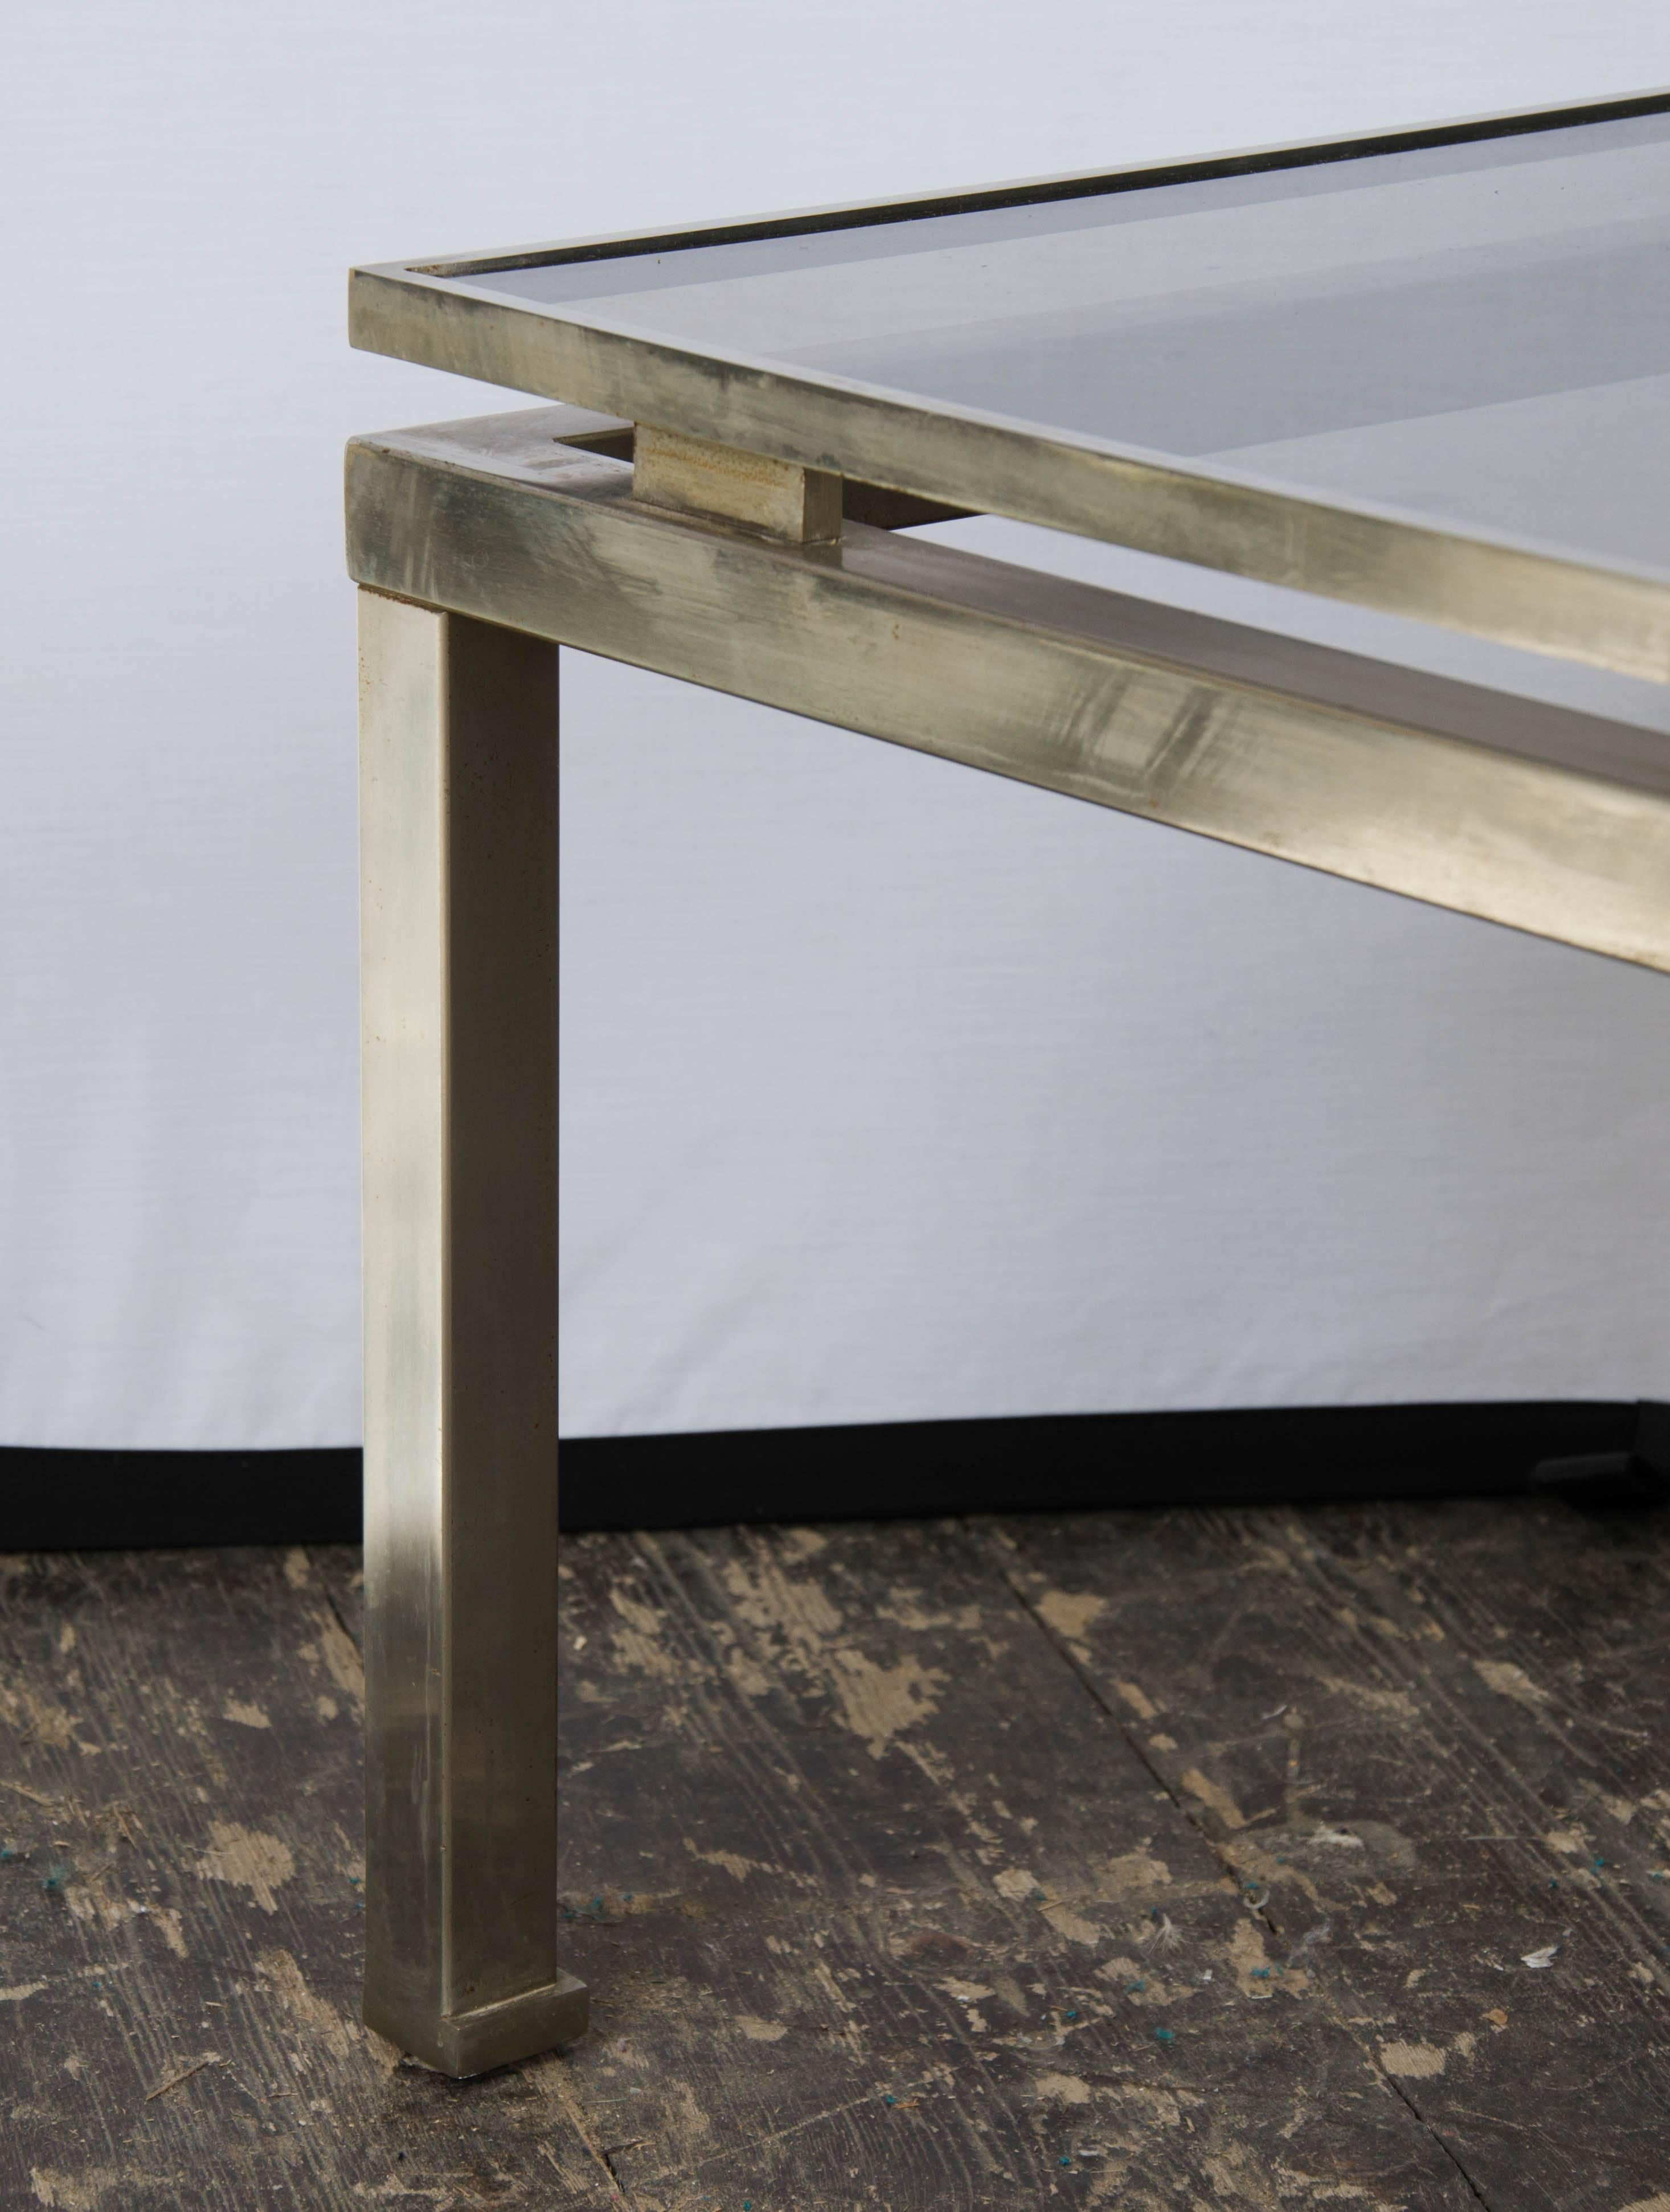 A pair of vintage side tables in antique polished steel and smoked glass tops, designed by Guy Lefevre, 1960s, French.